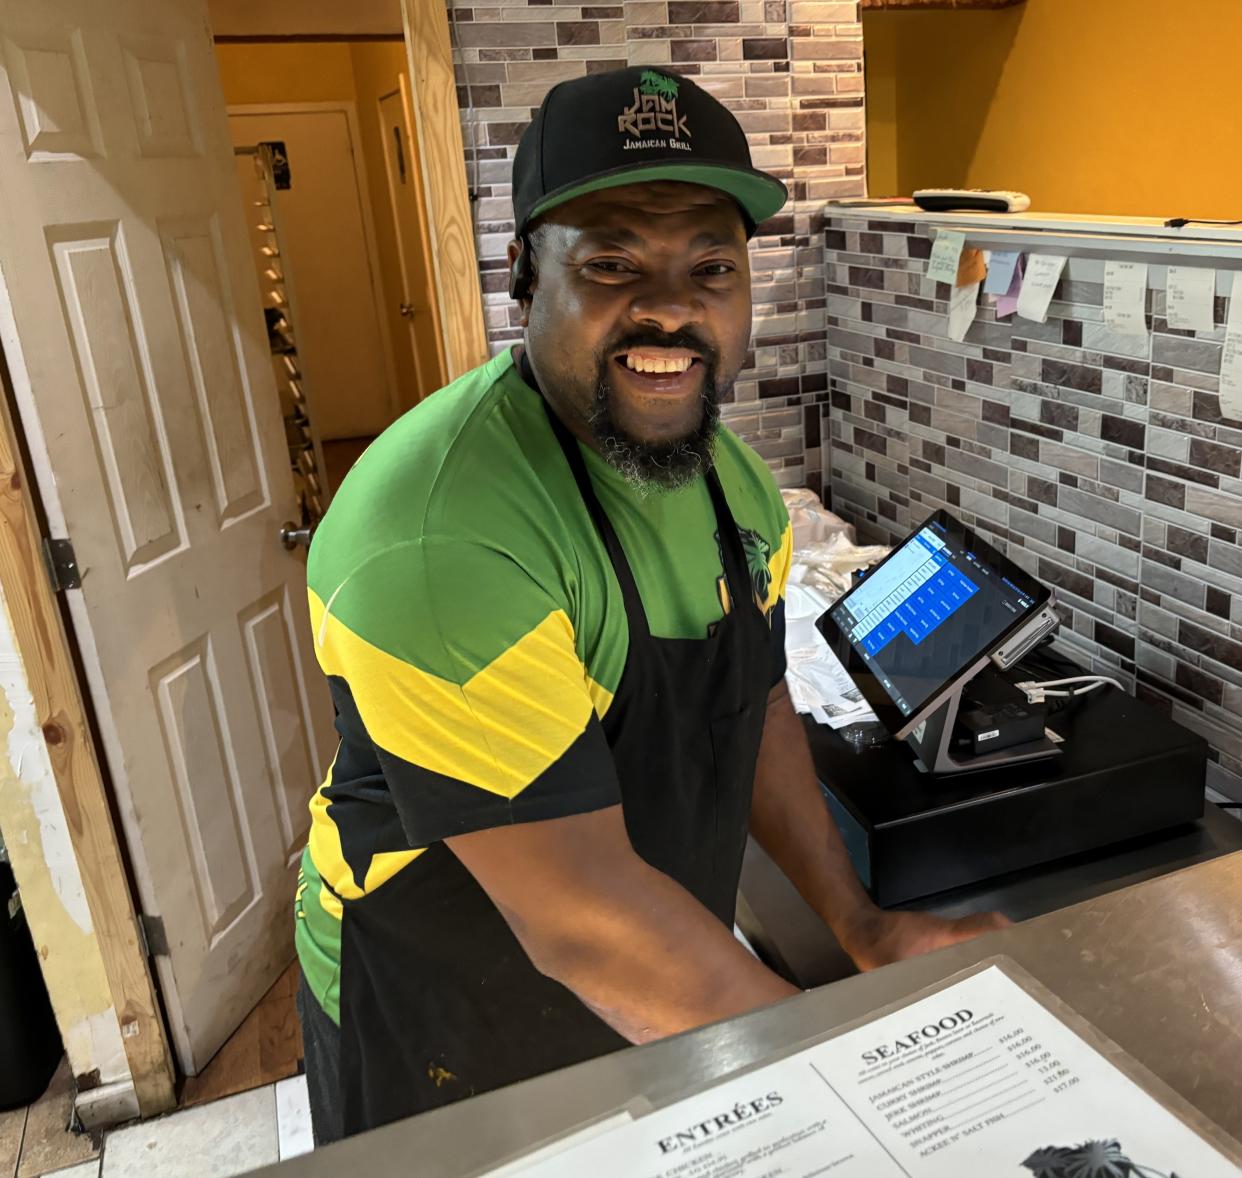 Restaurateur Niguel Wood serves authentic Jamaican fare at Jamrock Sports Bar & Grill at 417 College Road in Wilmington, N.C.